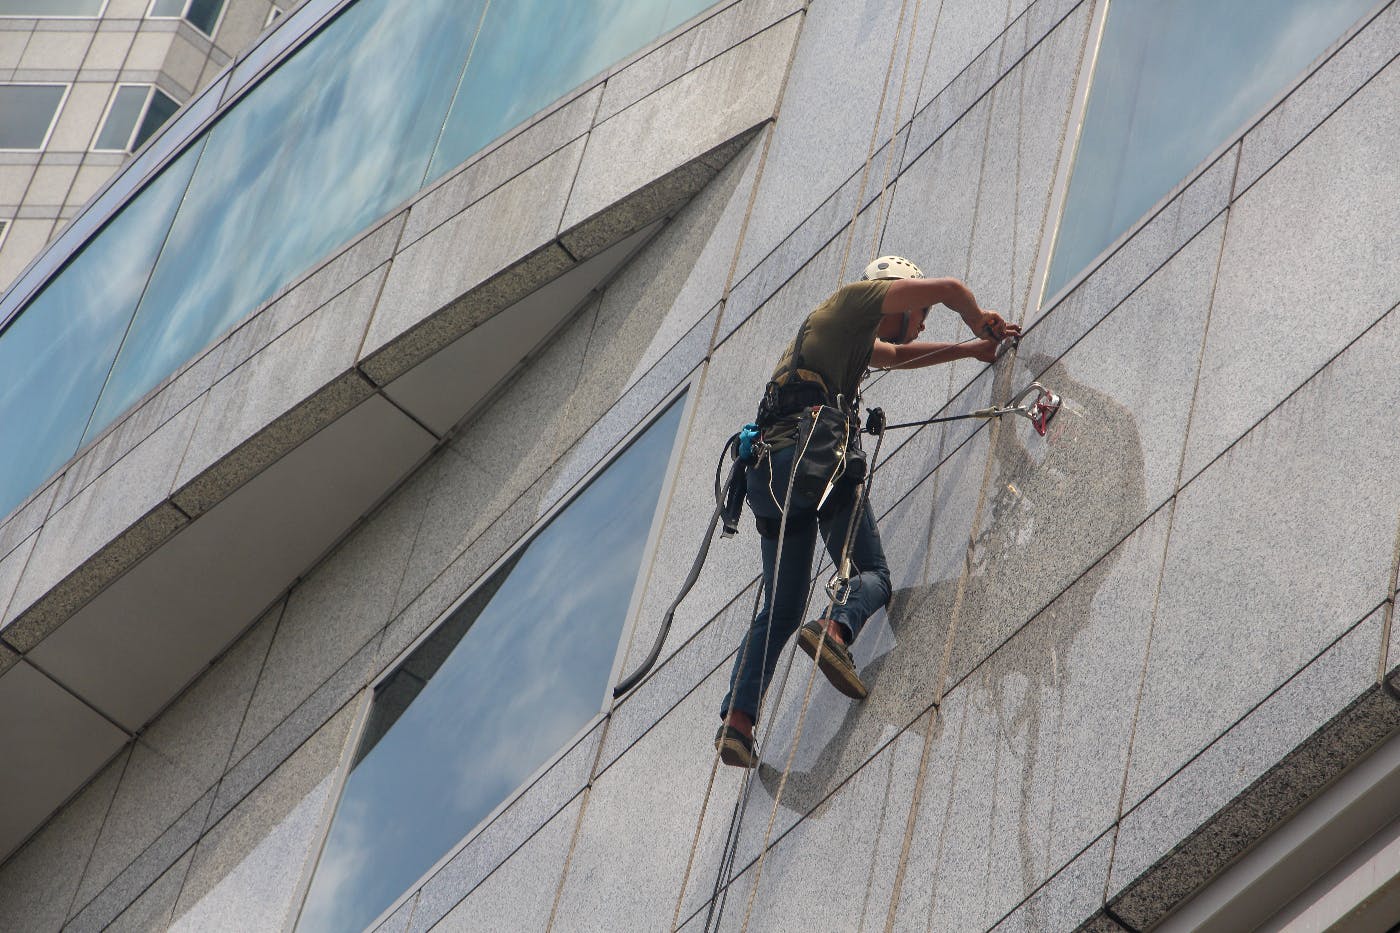 A window washer harnessed to the side of a building